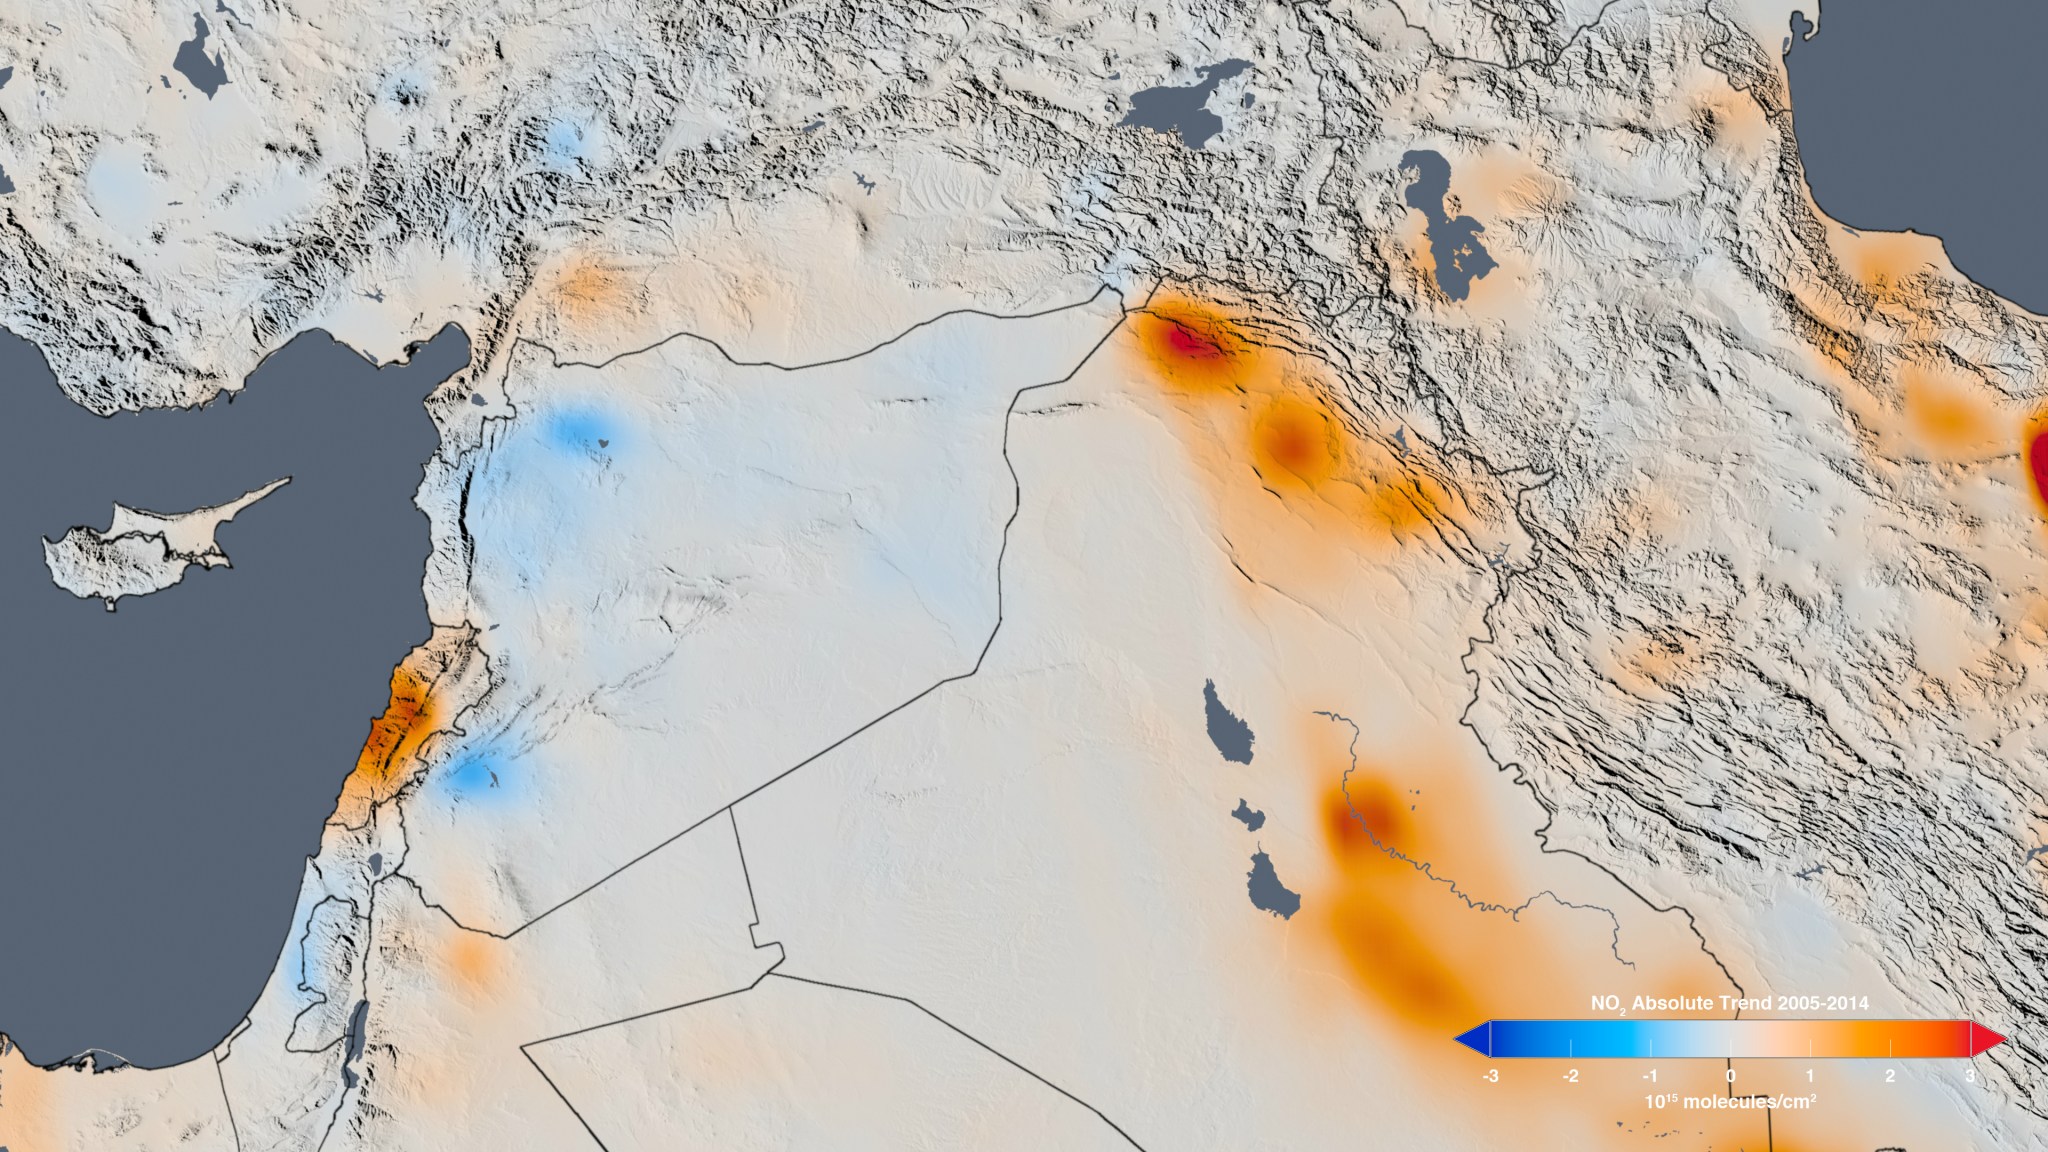 The trend map of the Middle East shows the change in nitrogen dioxide concentrations from 2005 to 2014.